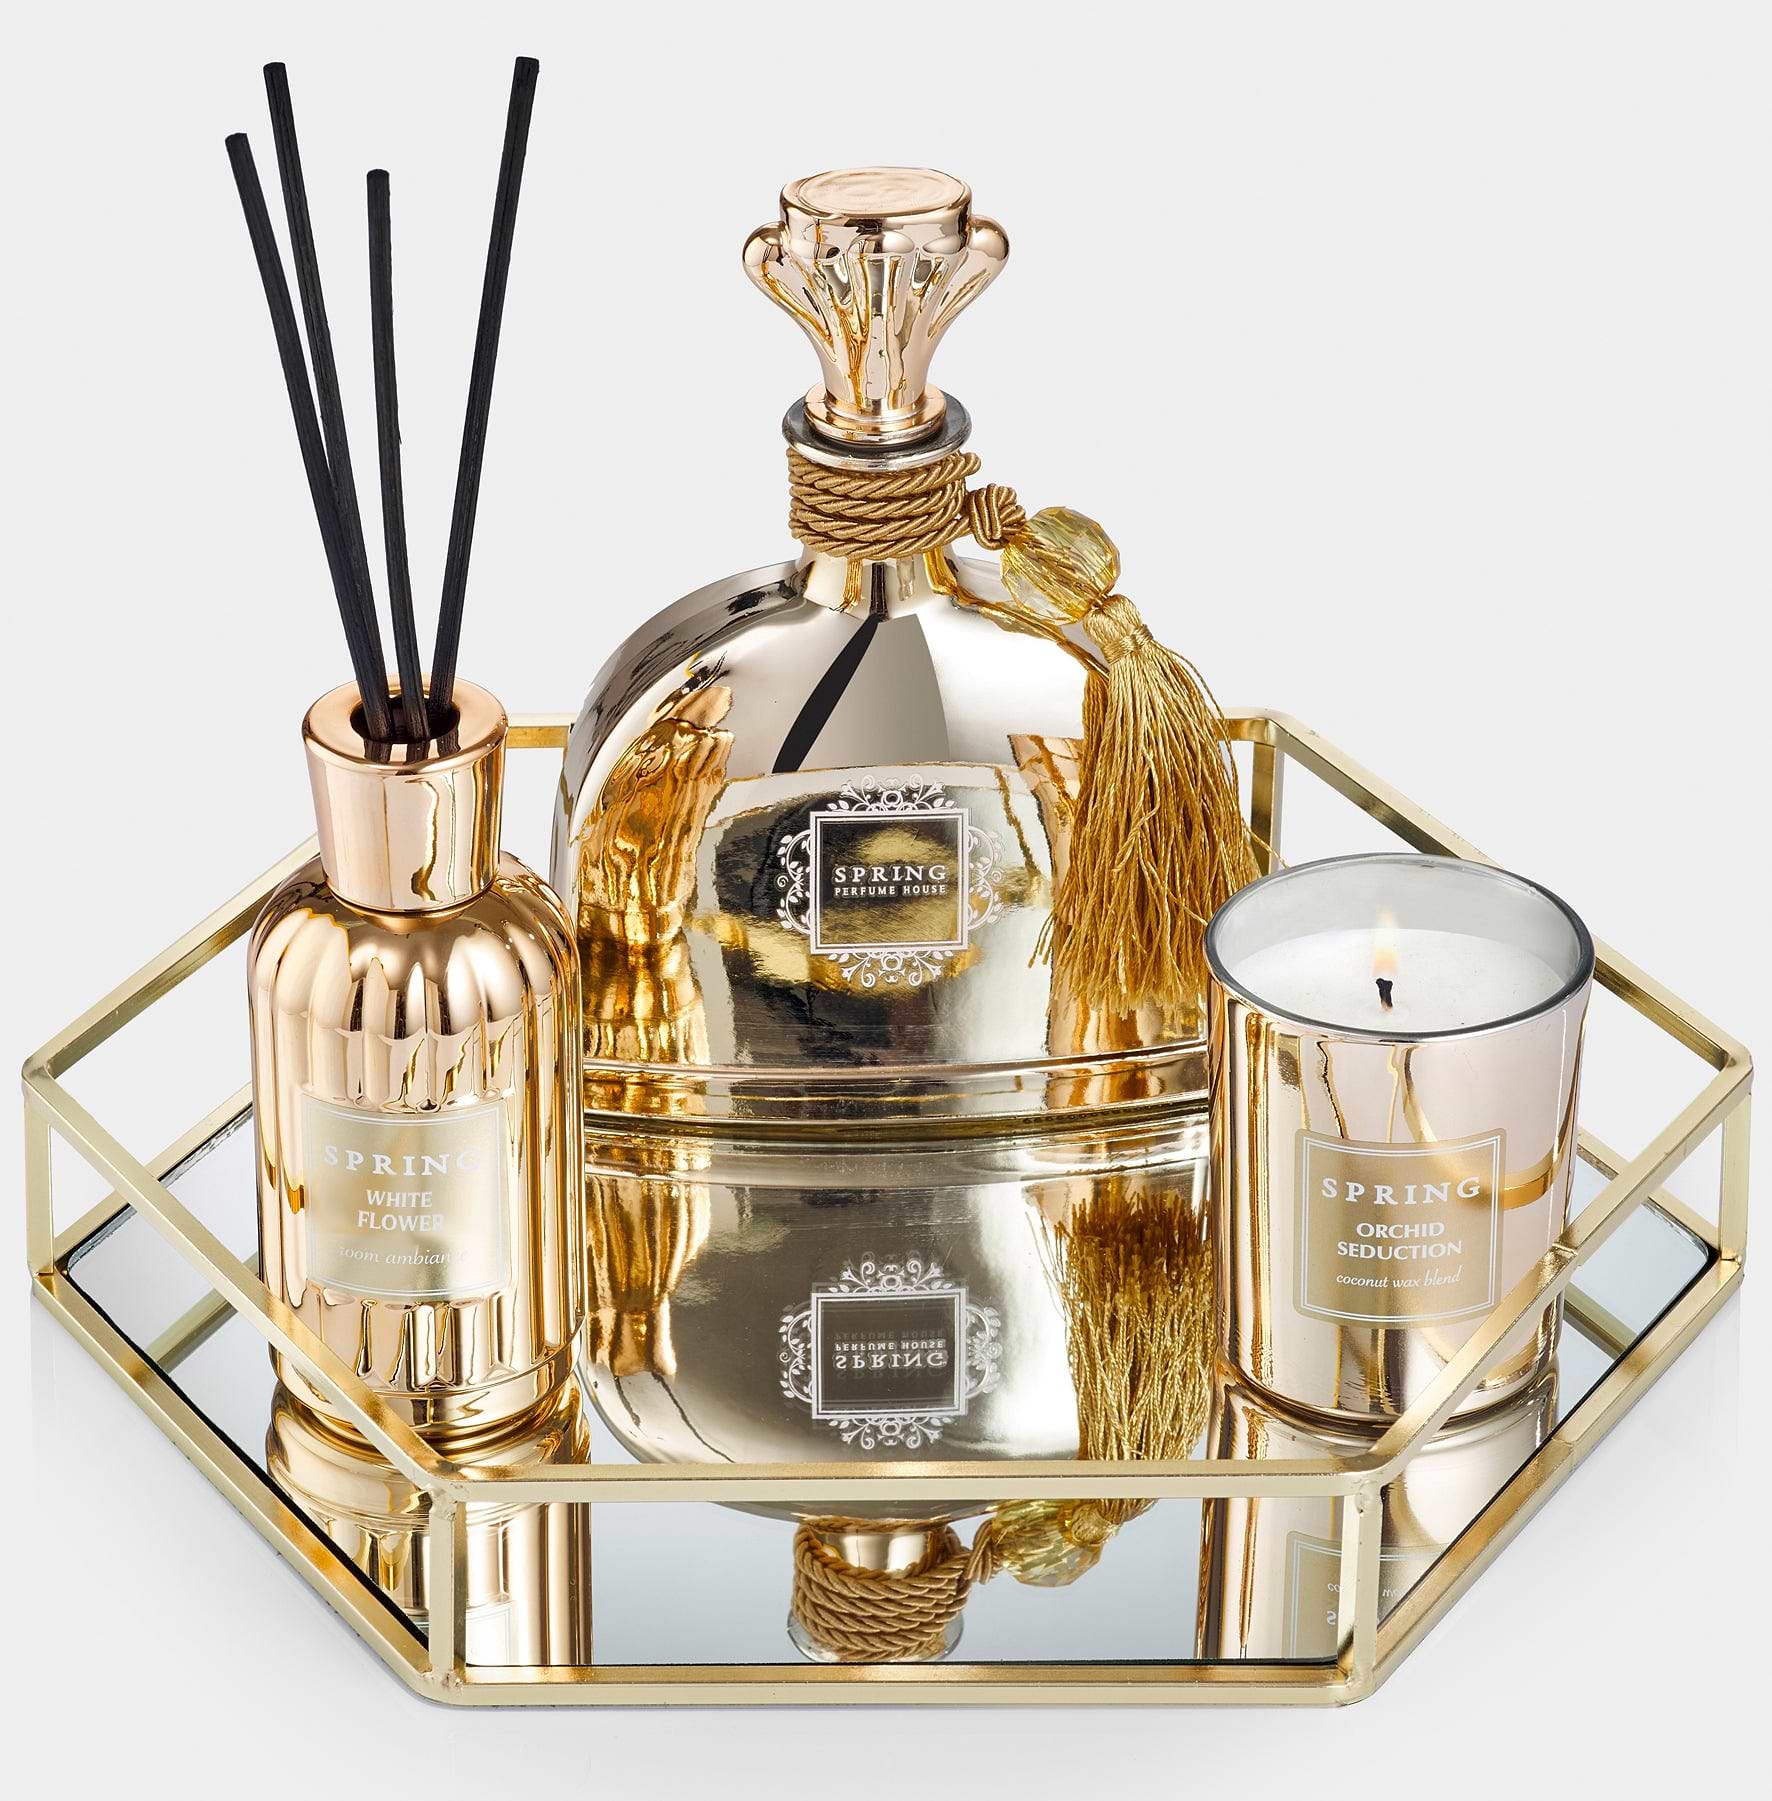 SPRING Fragrance golden Reed Diffuser | Fragrance Made in France | White Flower fragrance | Lily, Jasmine, Lily of The Valley, and Tuberose | 3.4 oz